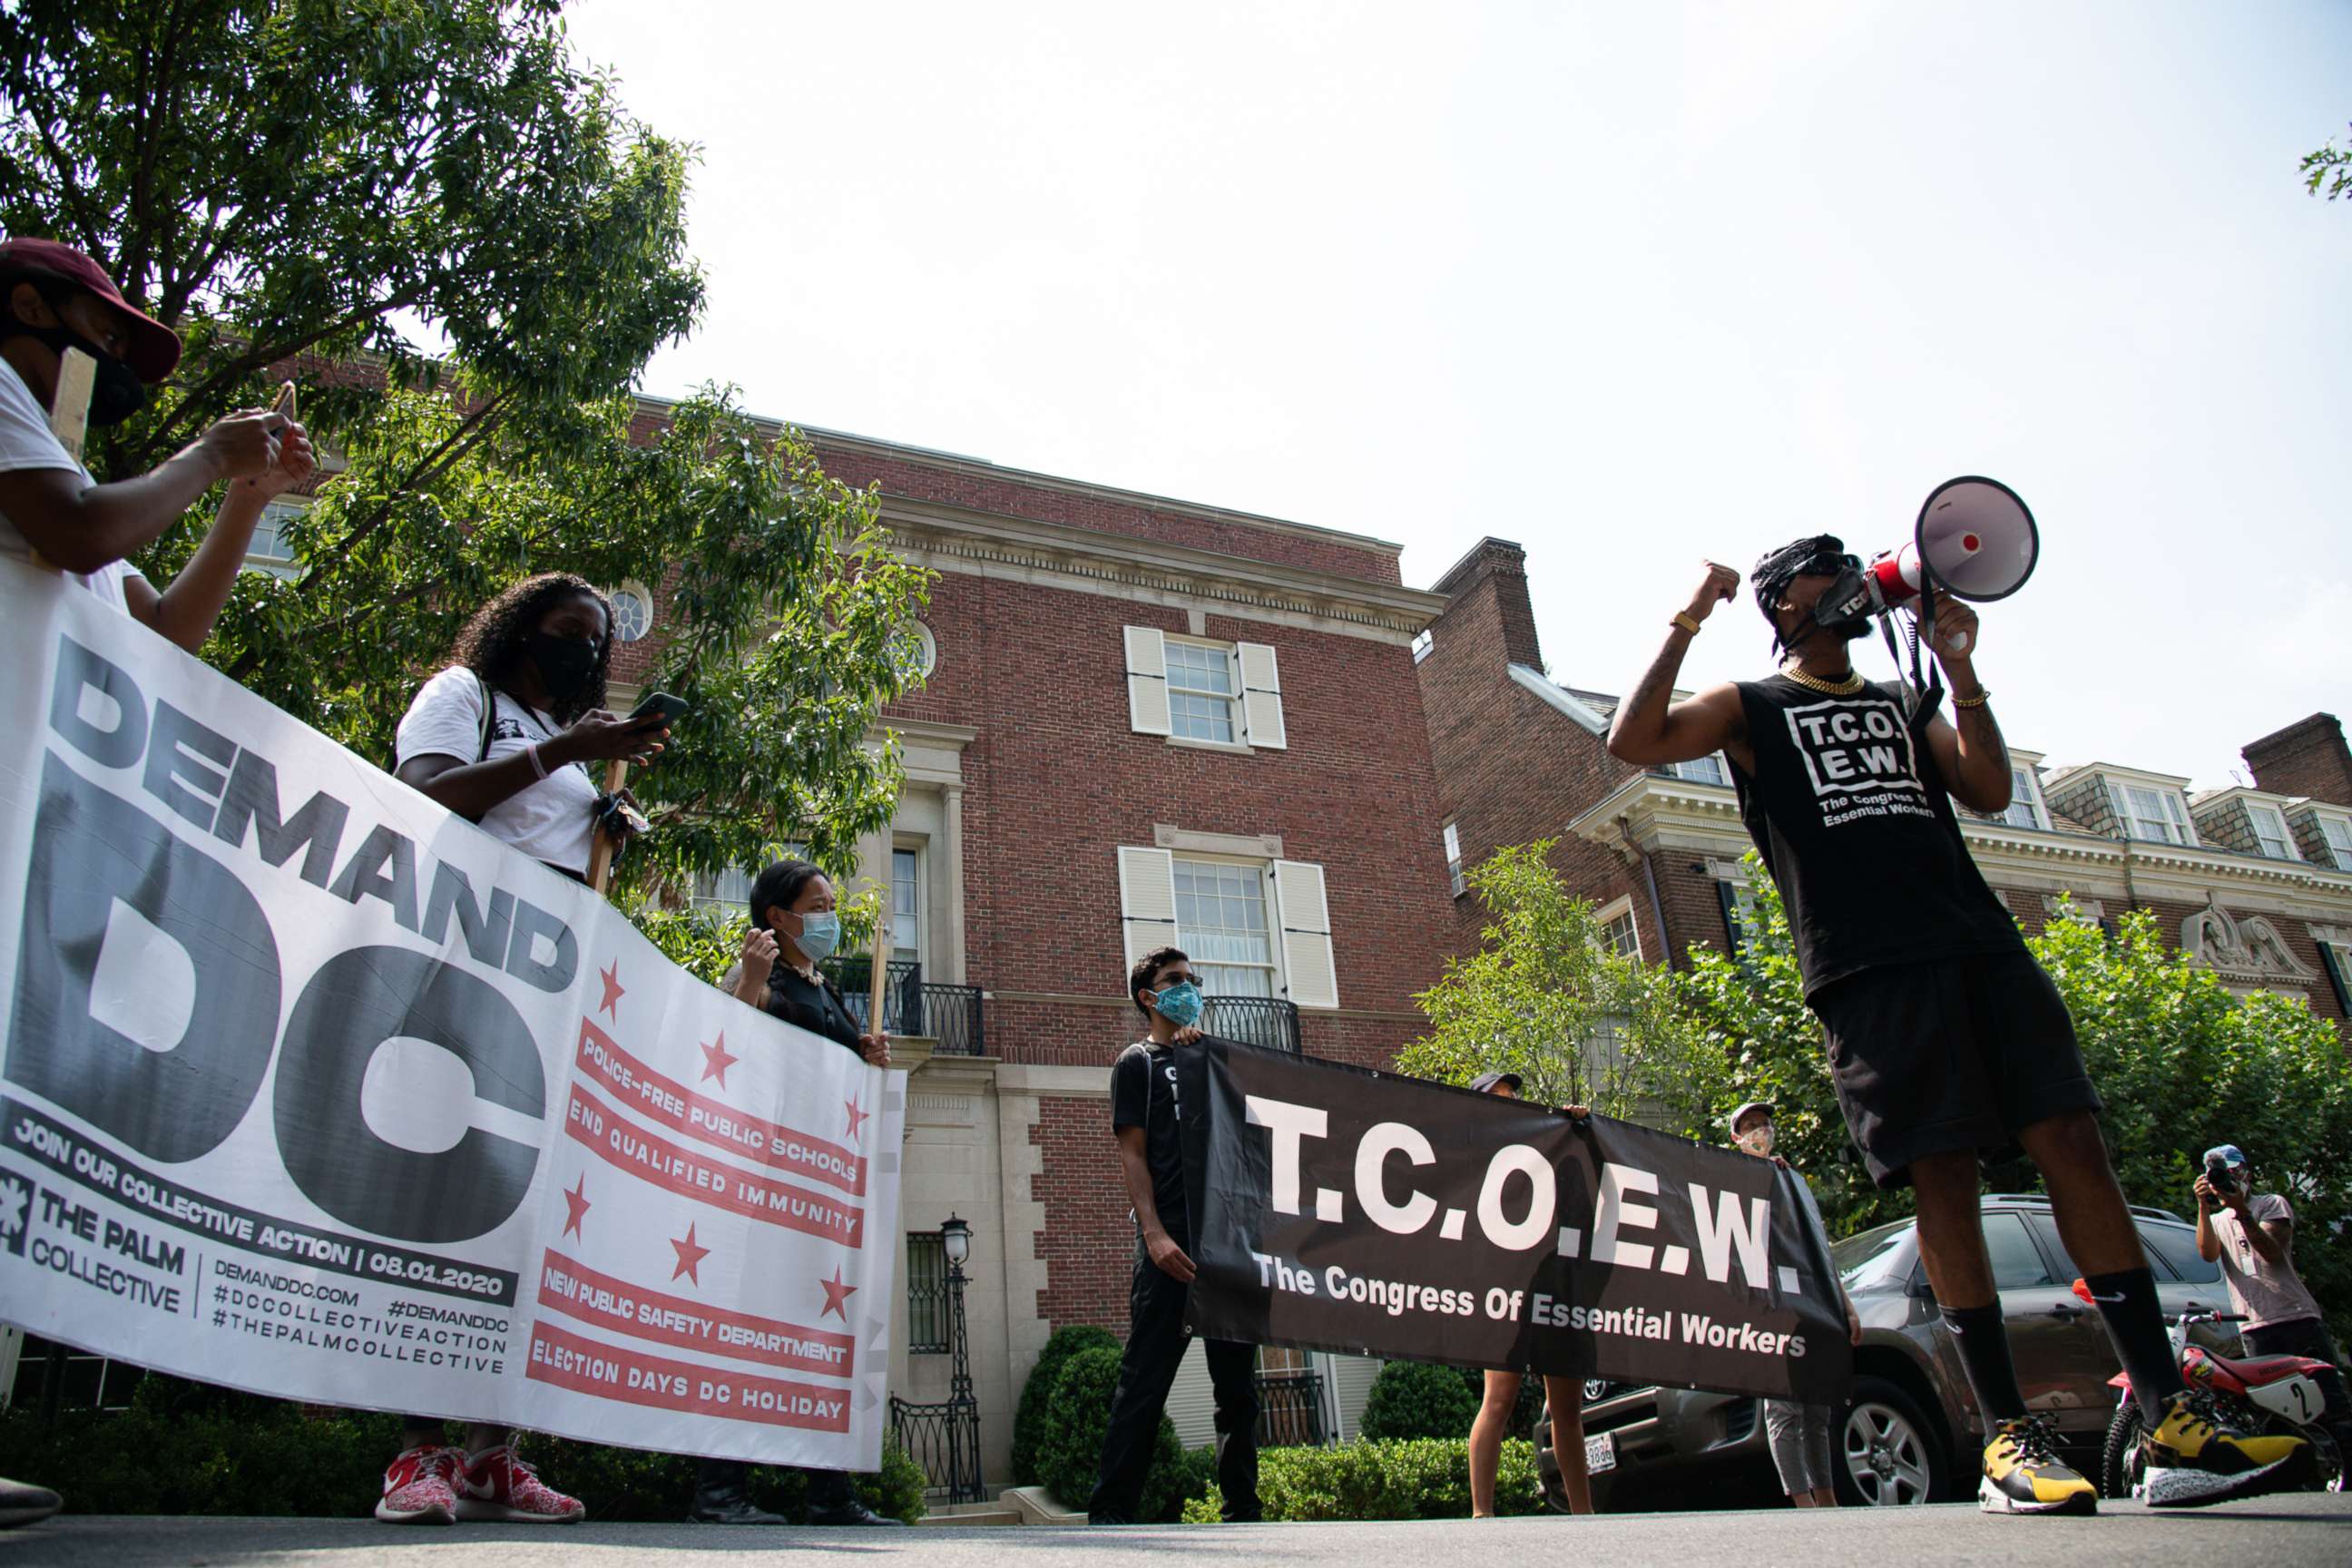 PHOTO: Chris Smalls, a former Amazon Warehouse worker and founder of the The Congress of Essential Workers, speaks at a protest in front of Jeff Bezos mansion in Washington, D.C., calling for expanded rights for essential workers, on Aug. 27, 2020.